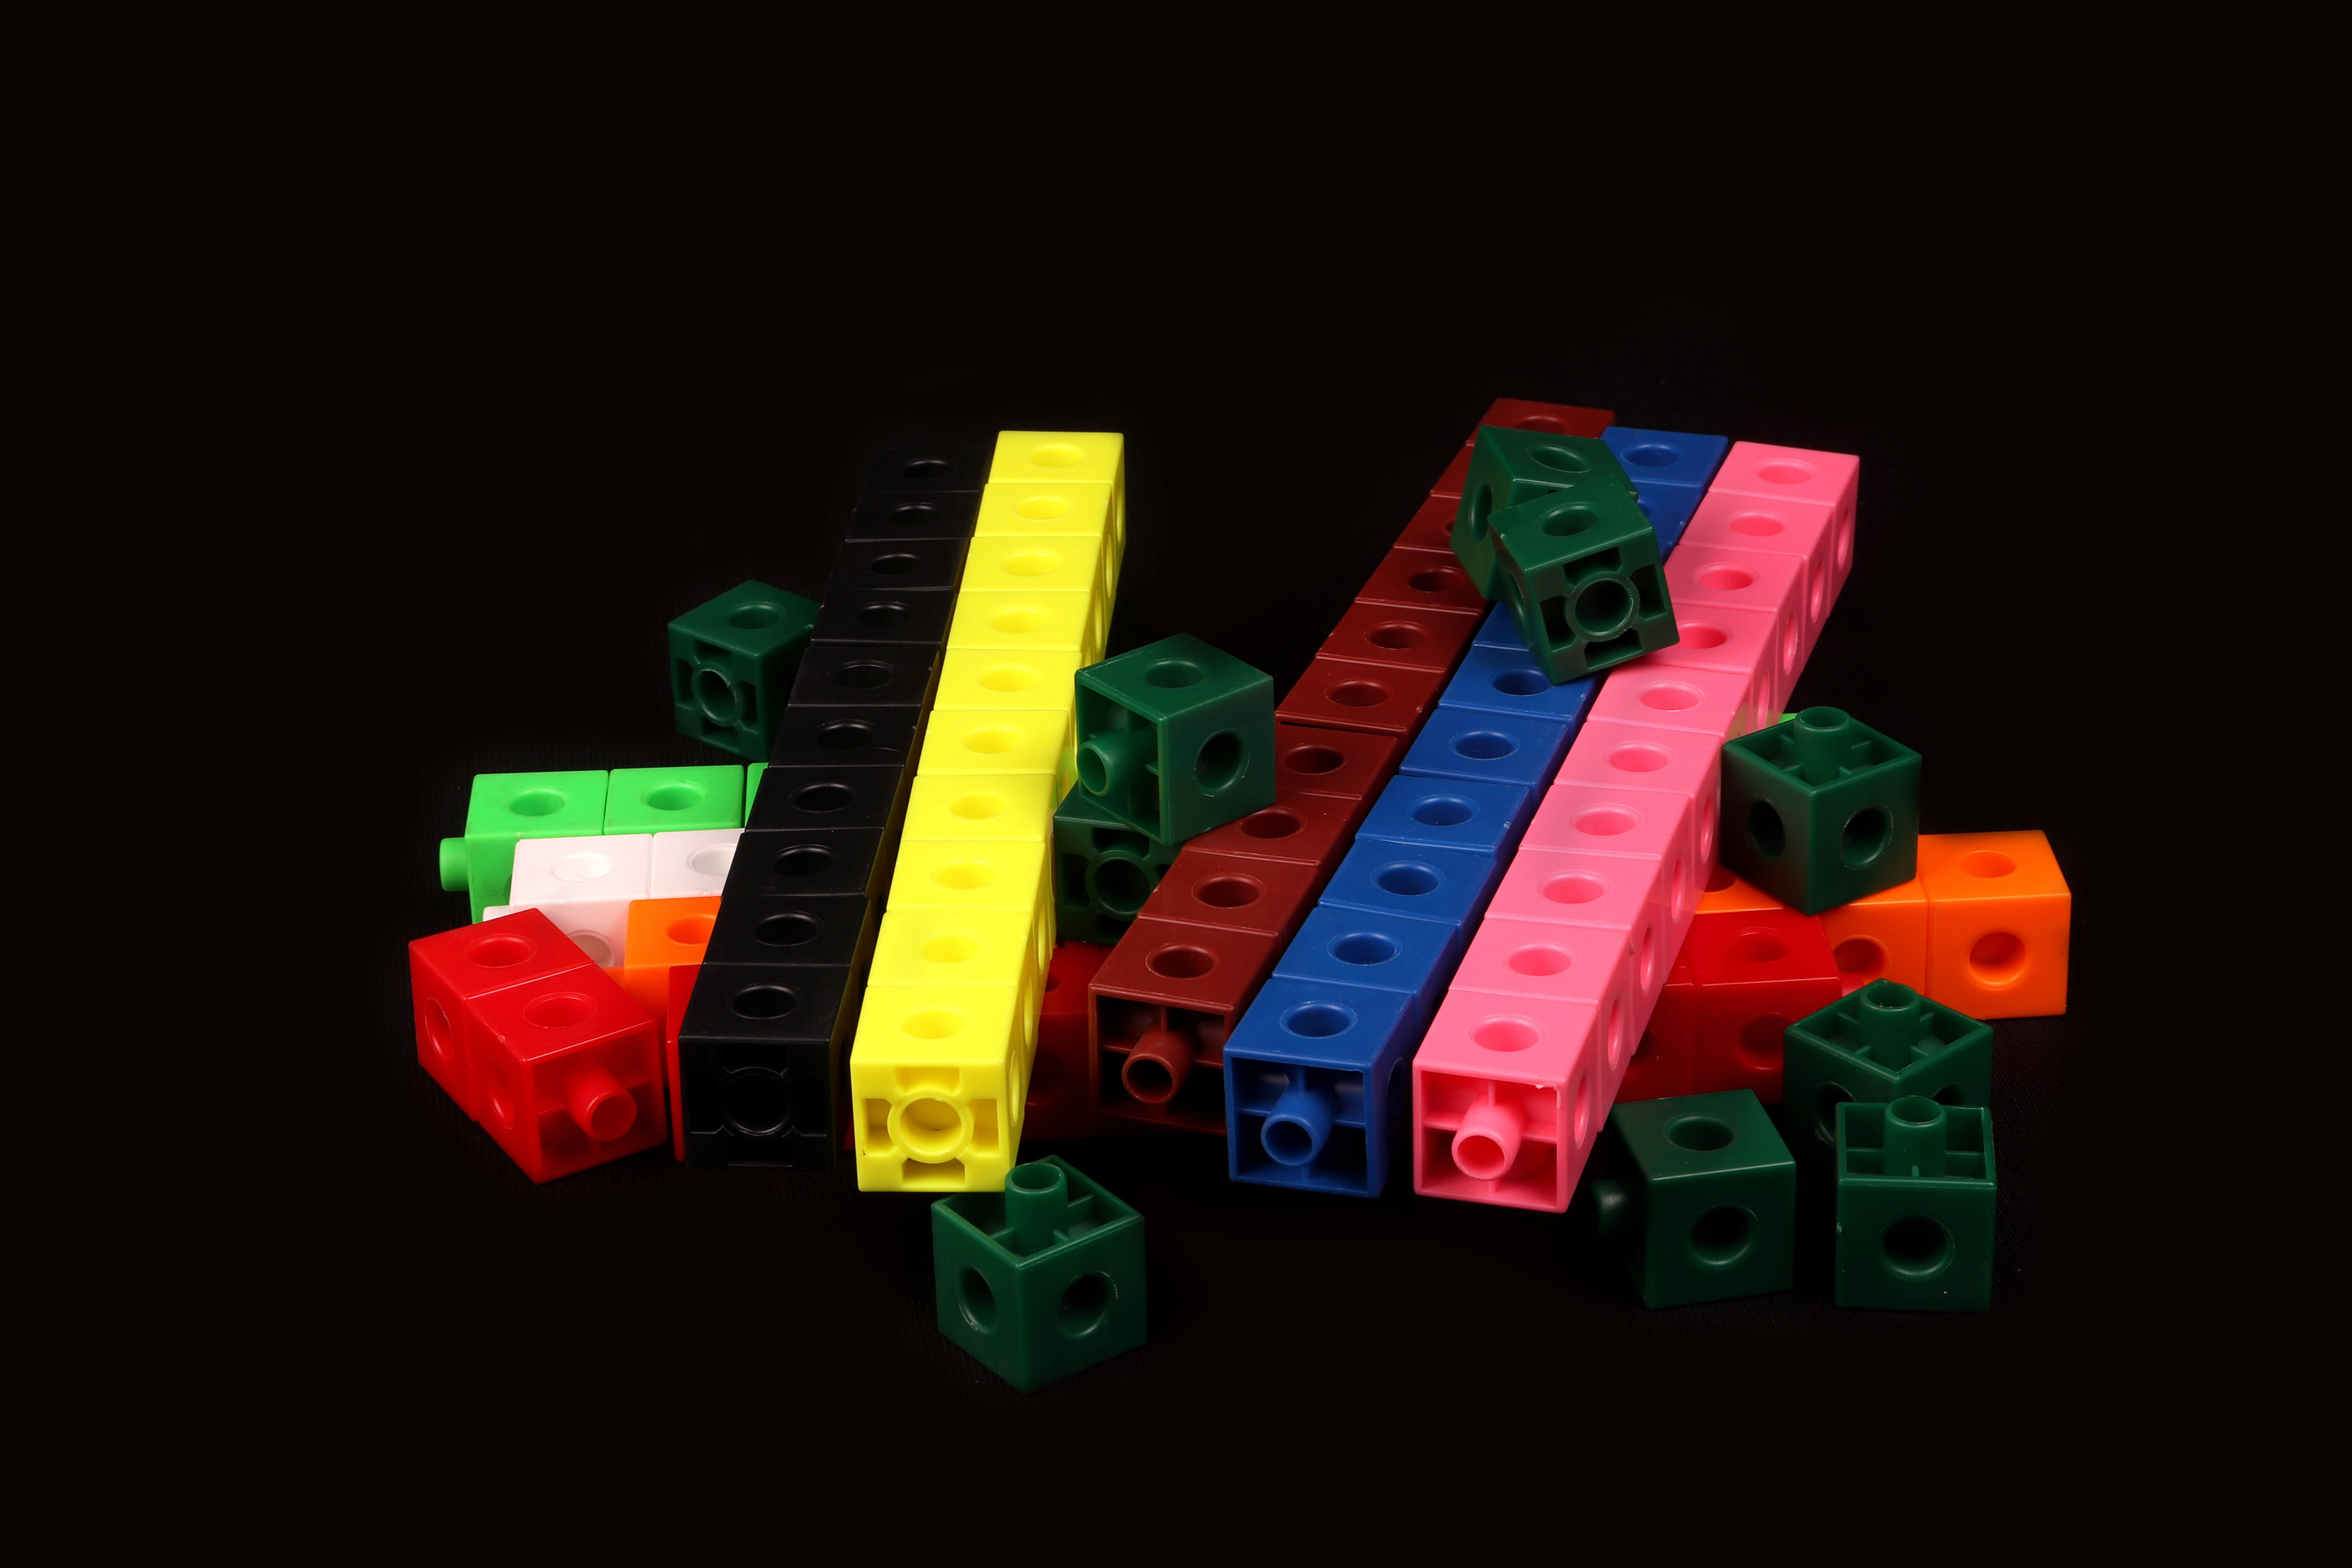 Jodo Blocks ( set of 125 cubes with box) - Mathematical Toy for developing Cognitive Skills, Number Sense through Fun Learning.